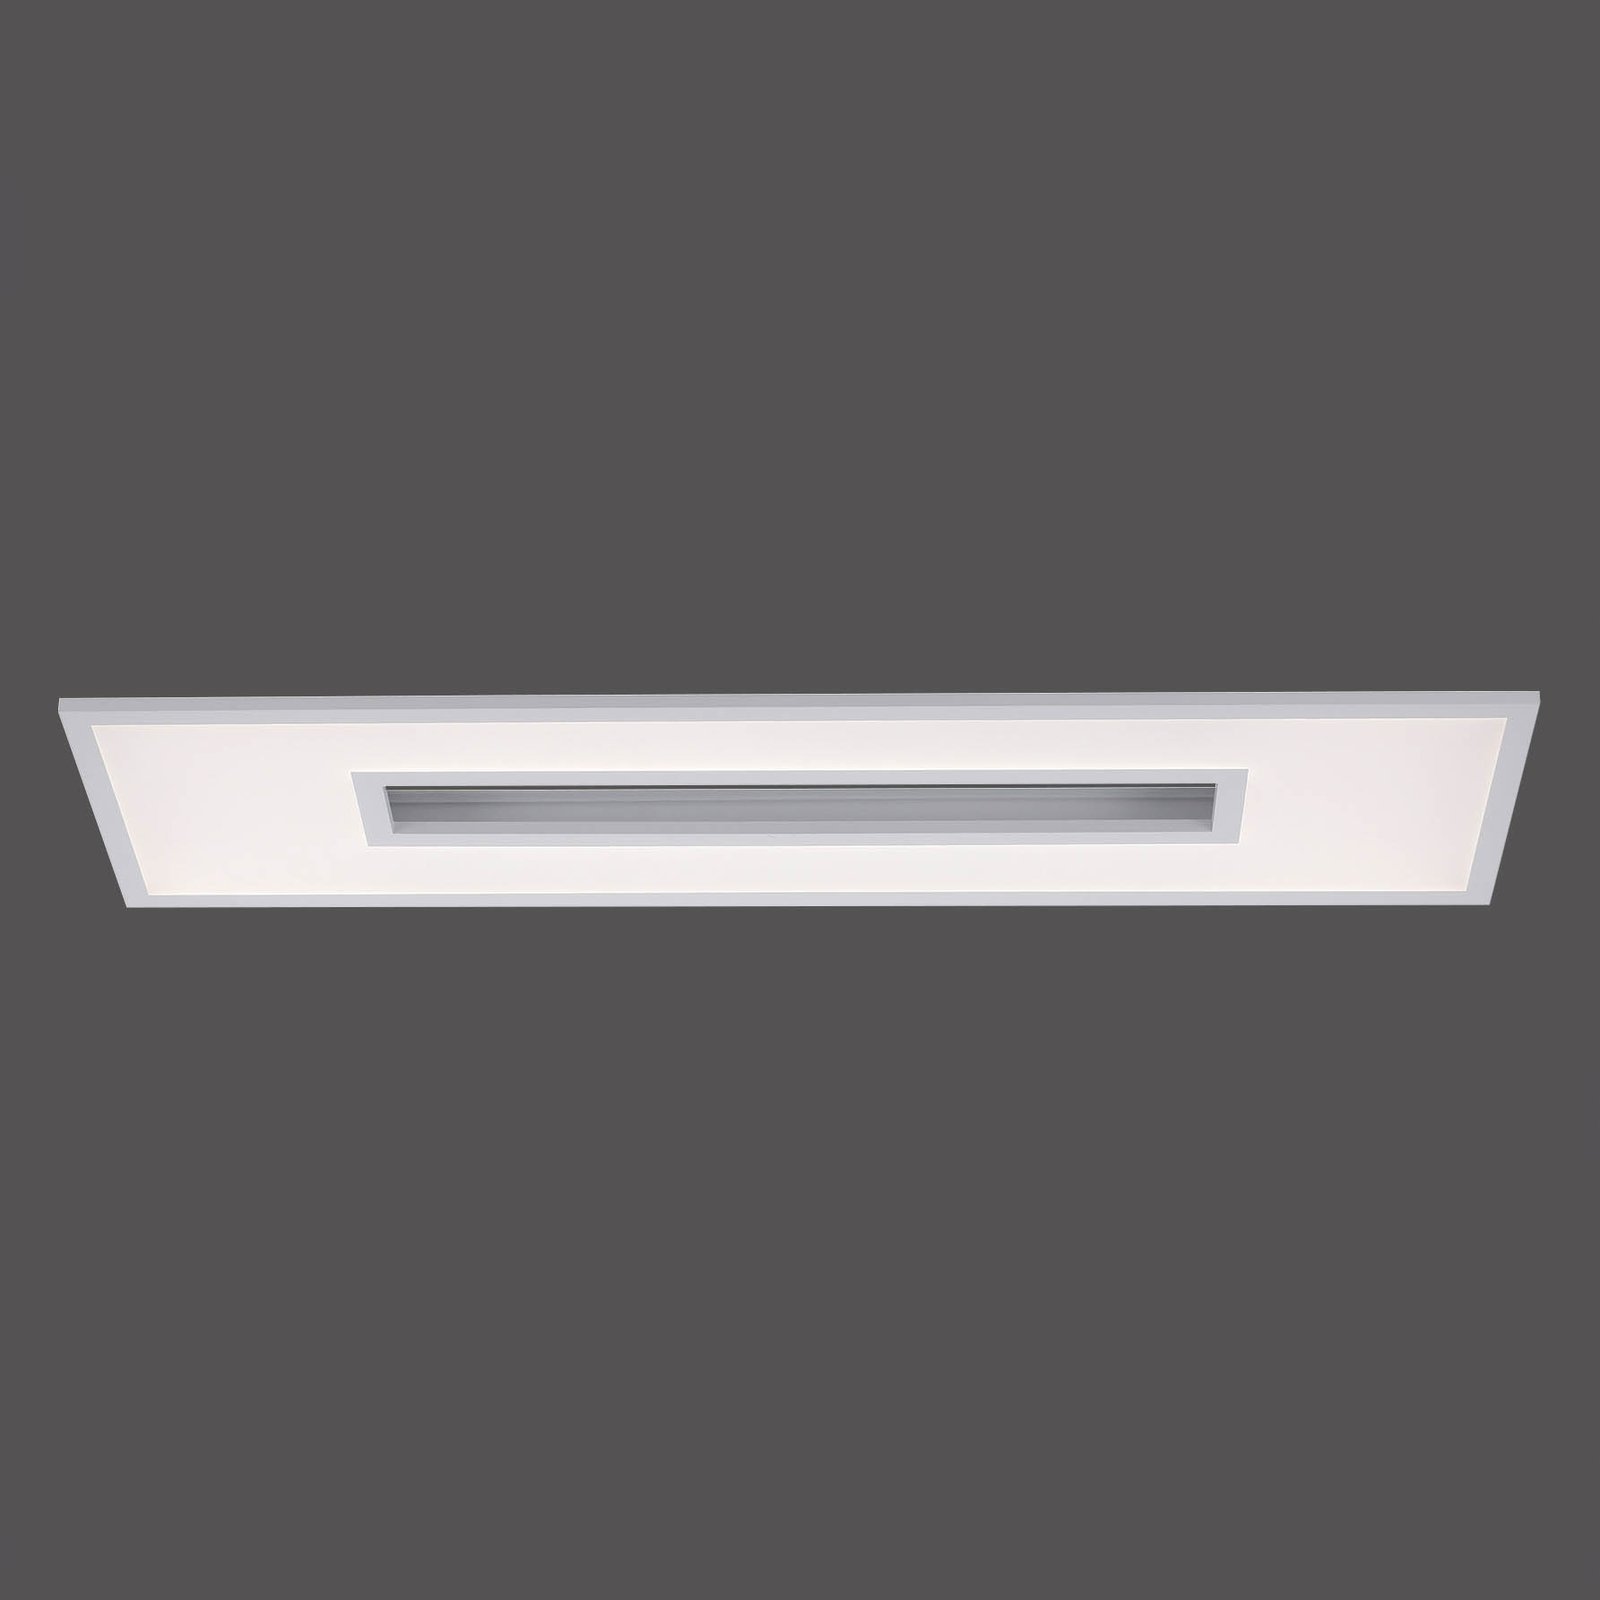 Recess LED ceiling light rectangular RGBW dimmable